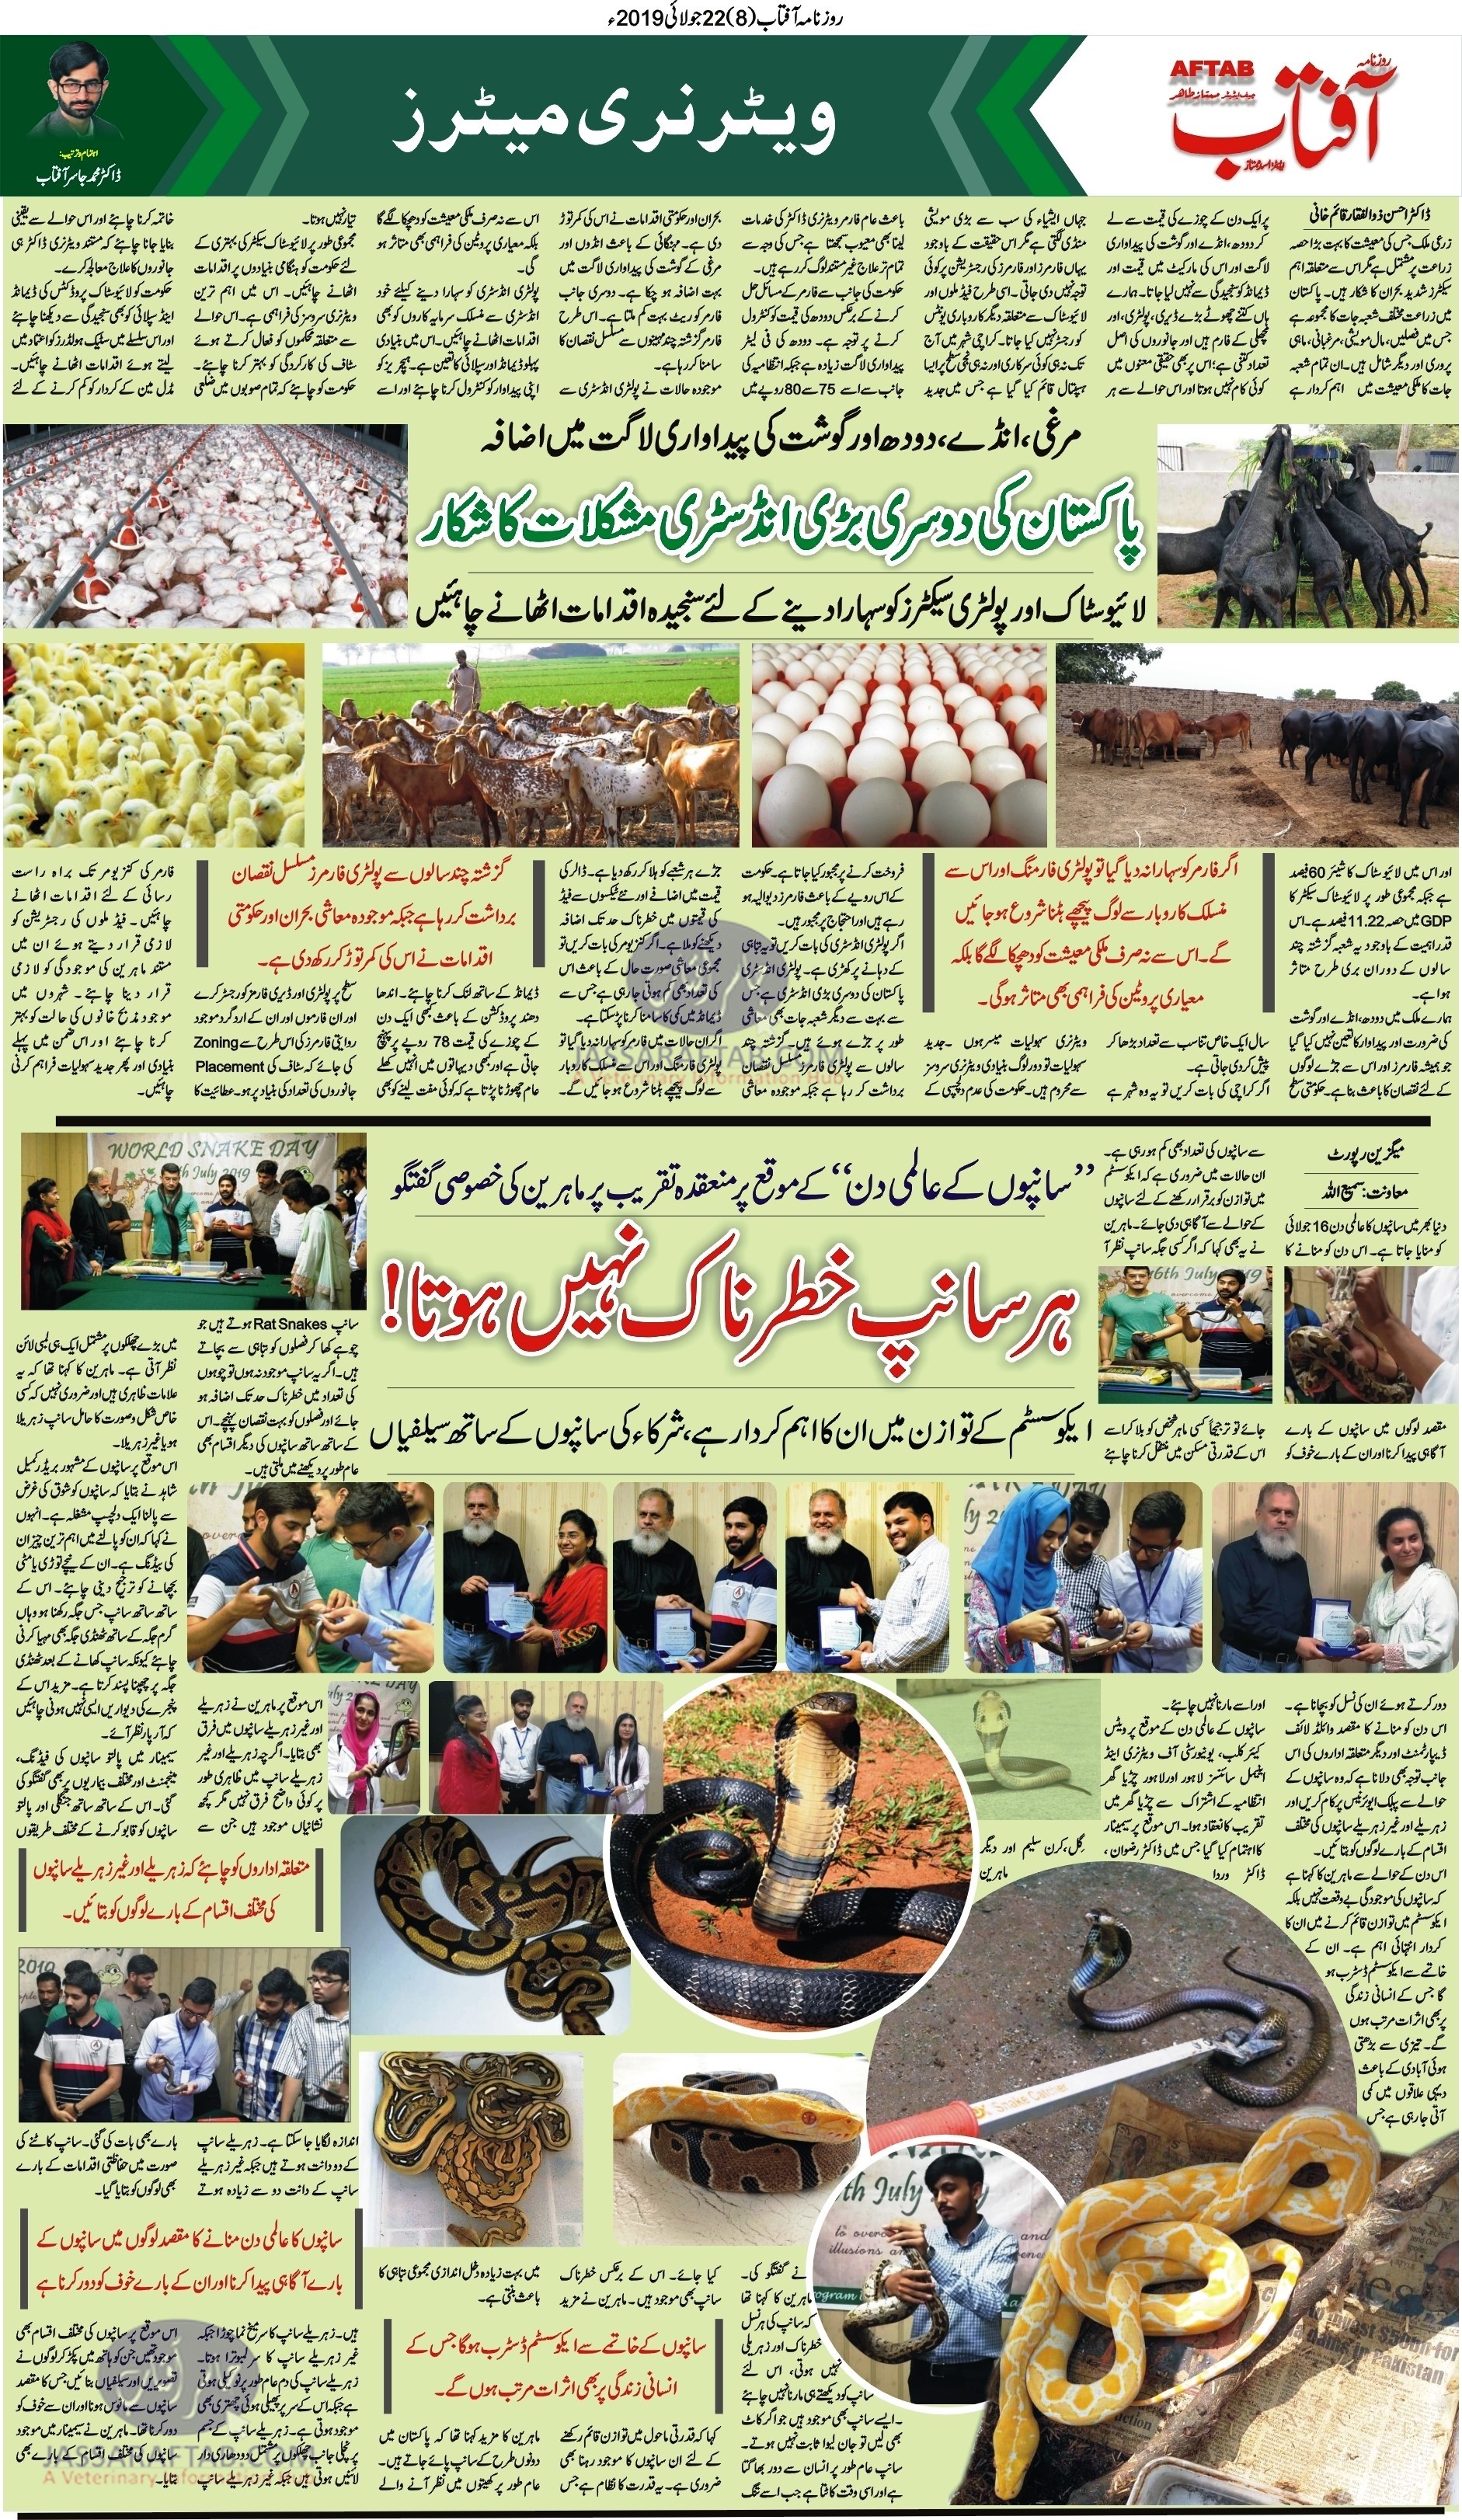 Crisis of Poultry and Livestock Industry and World Snake Day at Lahore Zoo. Special veterinary articles. 